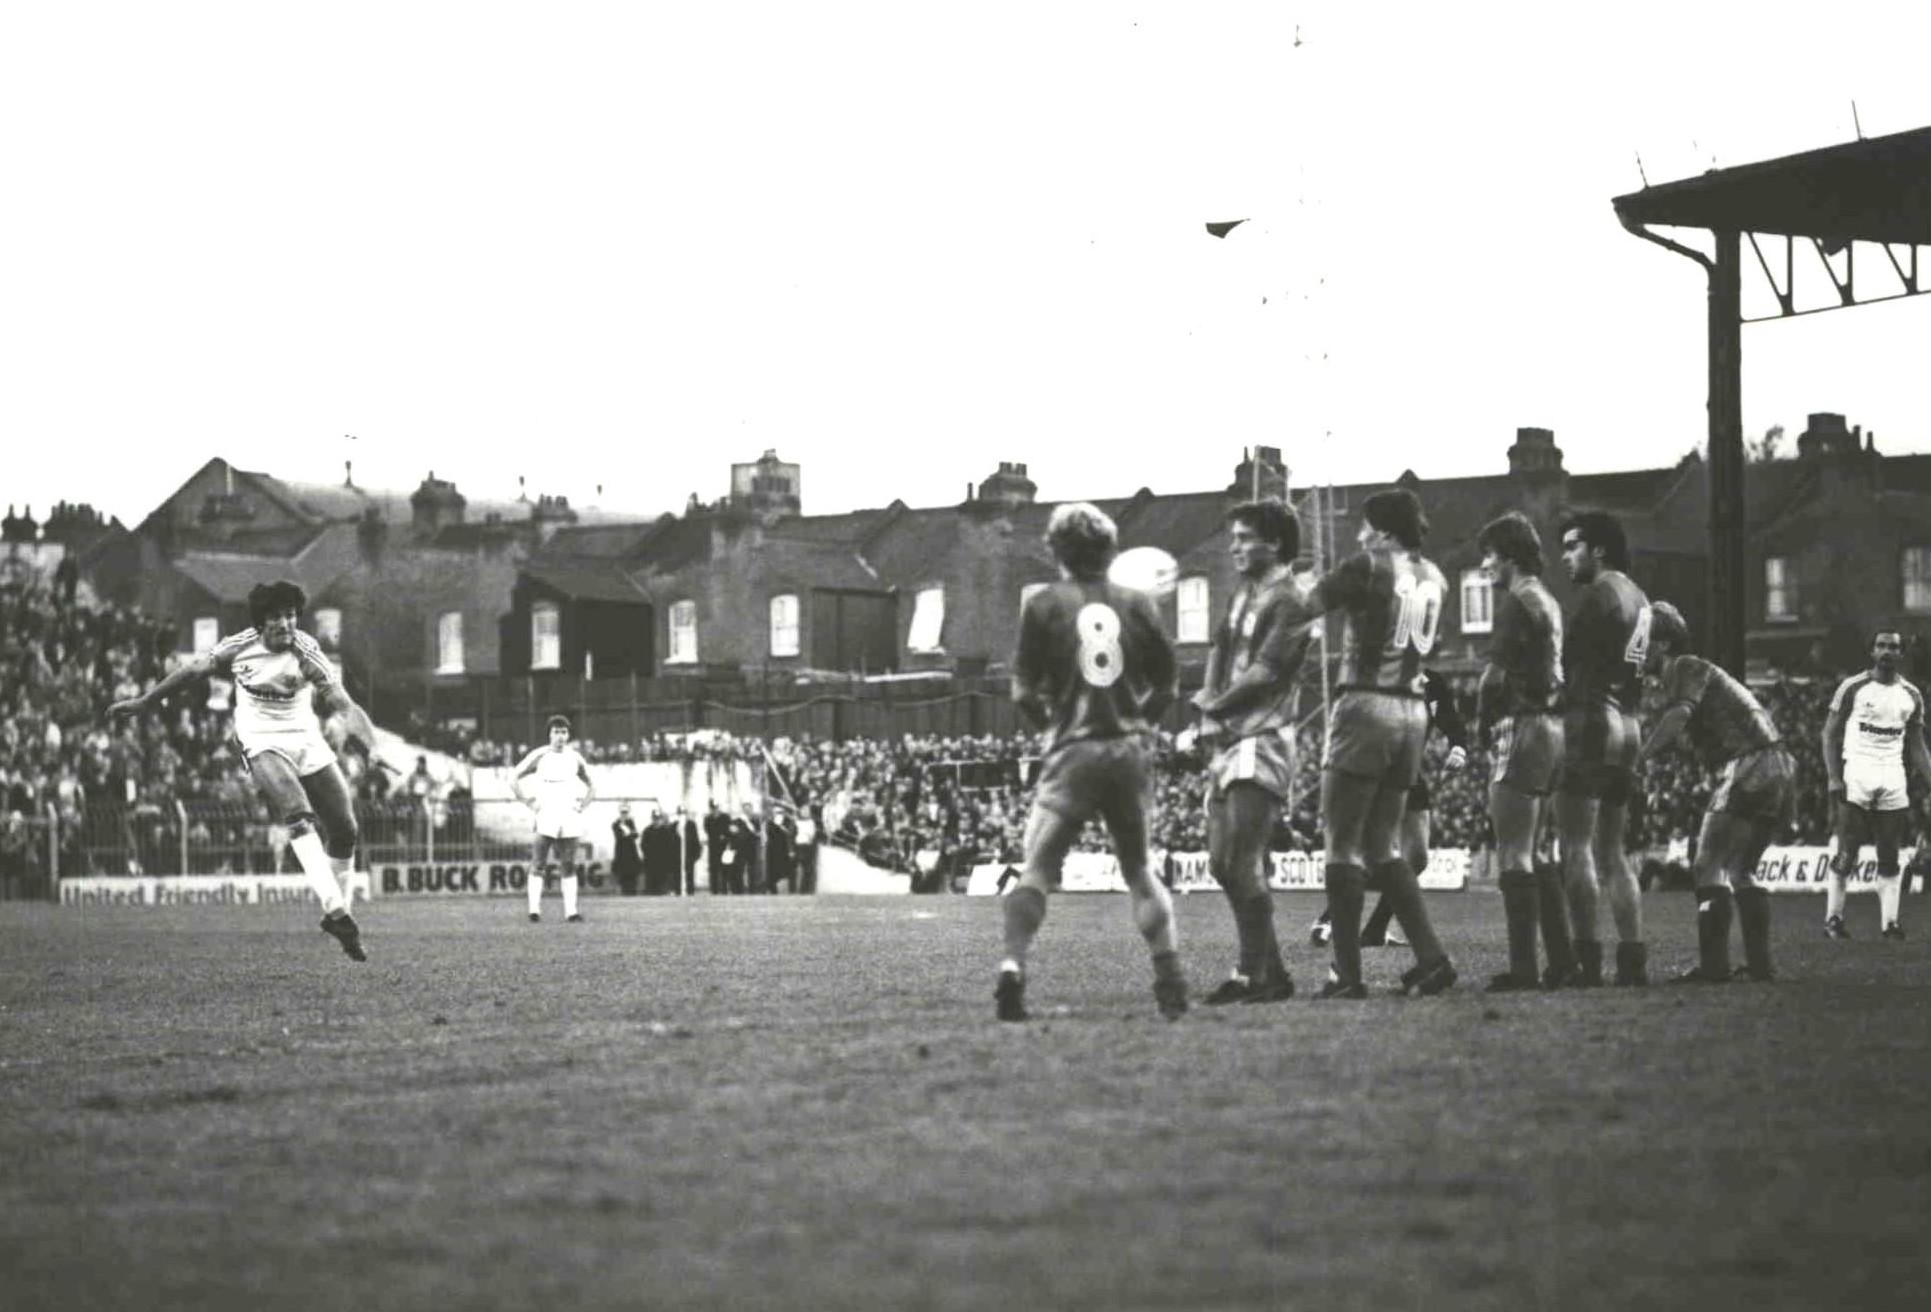 Raddy Antic fires in a free-kick which is saved